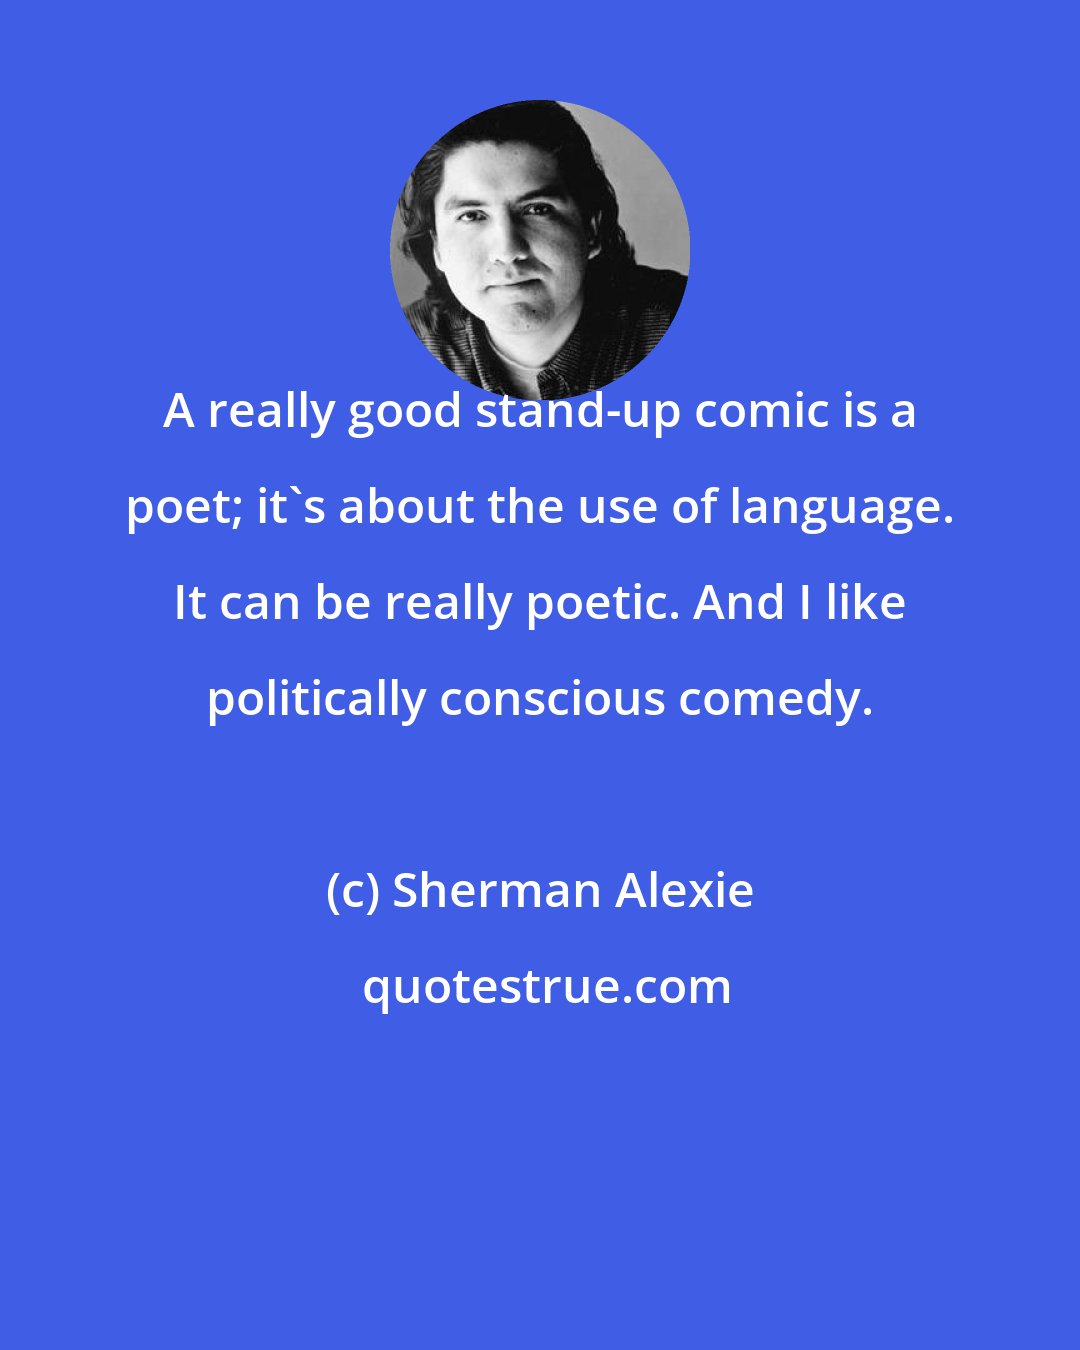 Sherman Alexie: A really good stand-up comic is a poet; it's about the use of language. It can be really poetic. And I like politically conscious comedy.